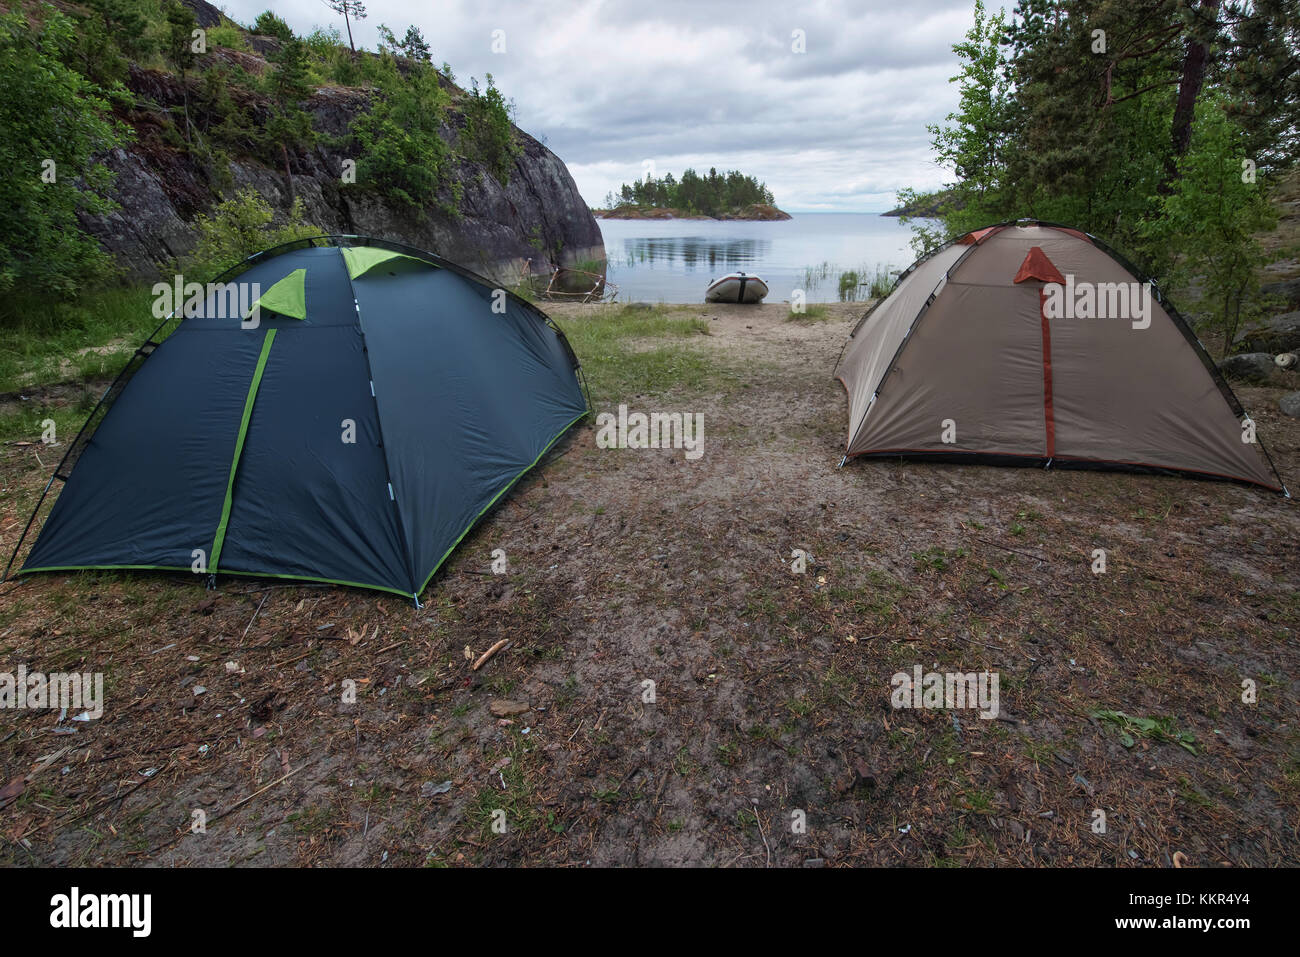 Tourist camp with two tents and inflatable boat at the river or lake bank. Camp is located among the forest and rocks. Summer cloudy weather. Stock Photo